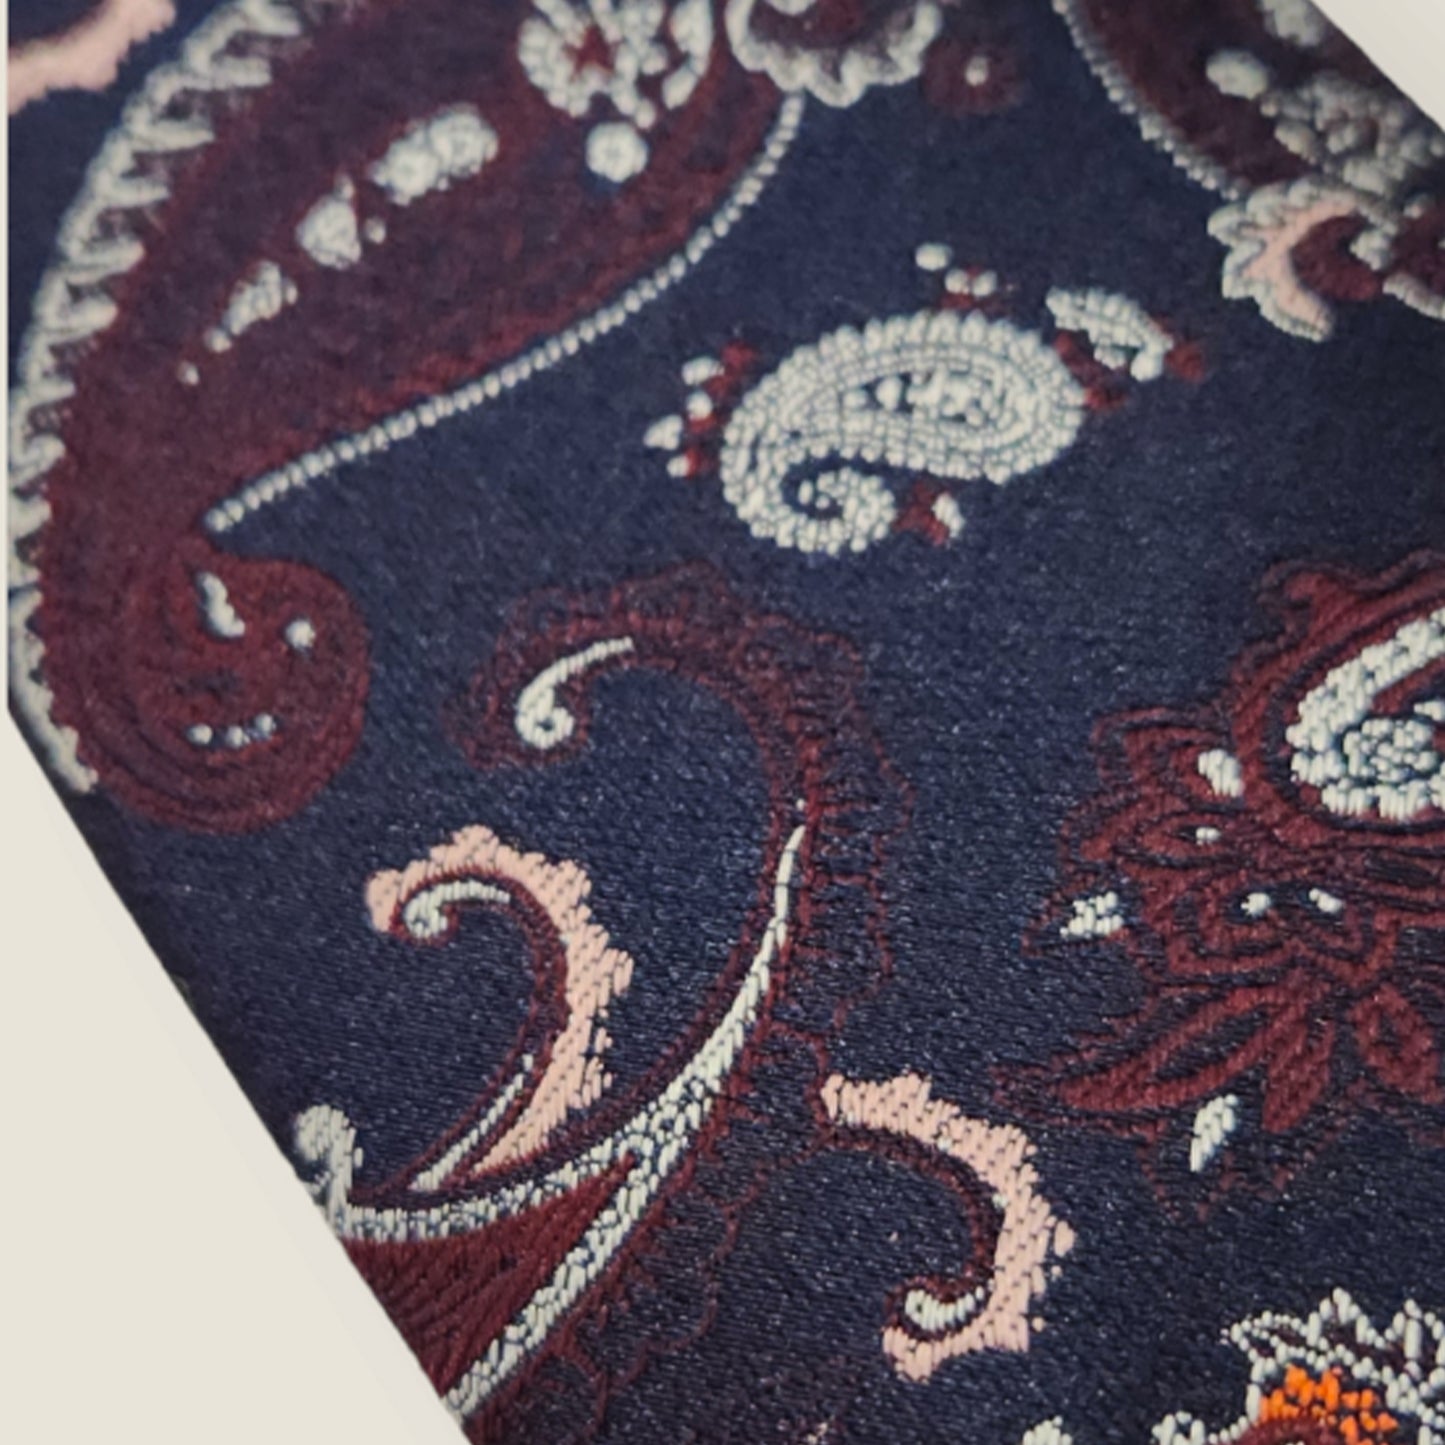 Tie and Hankie Set - Paisley Navy and Burgundy I173116